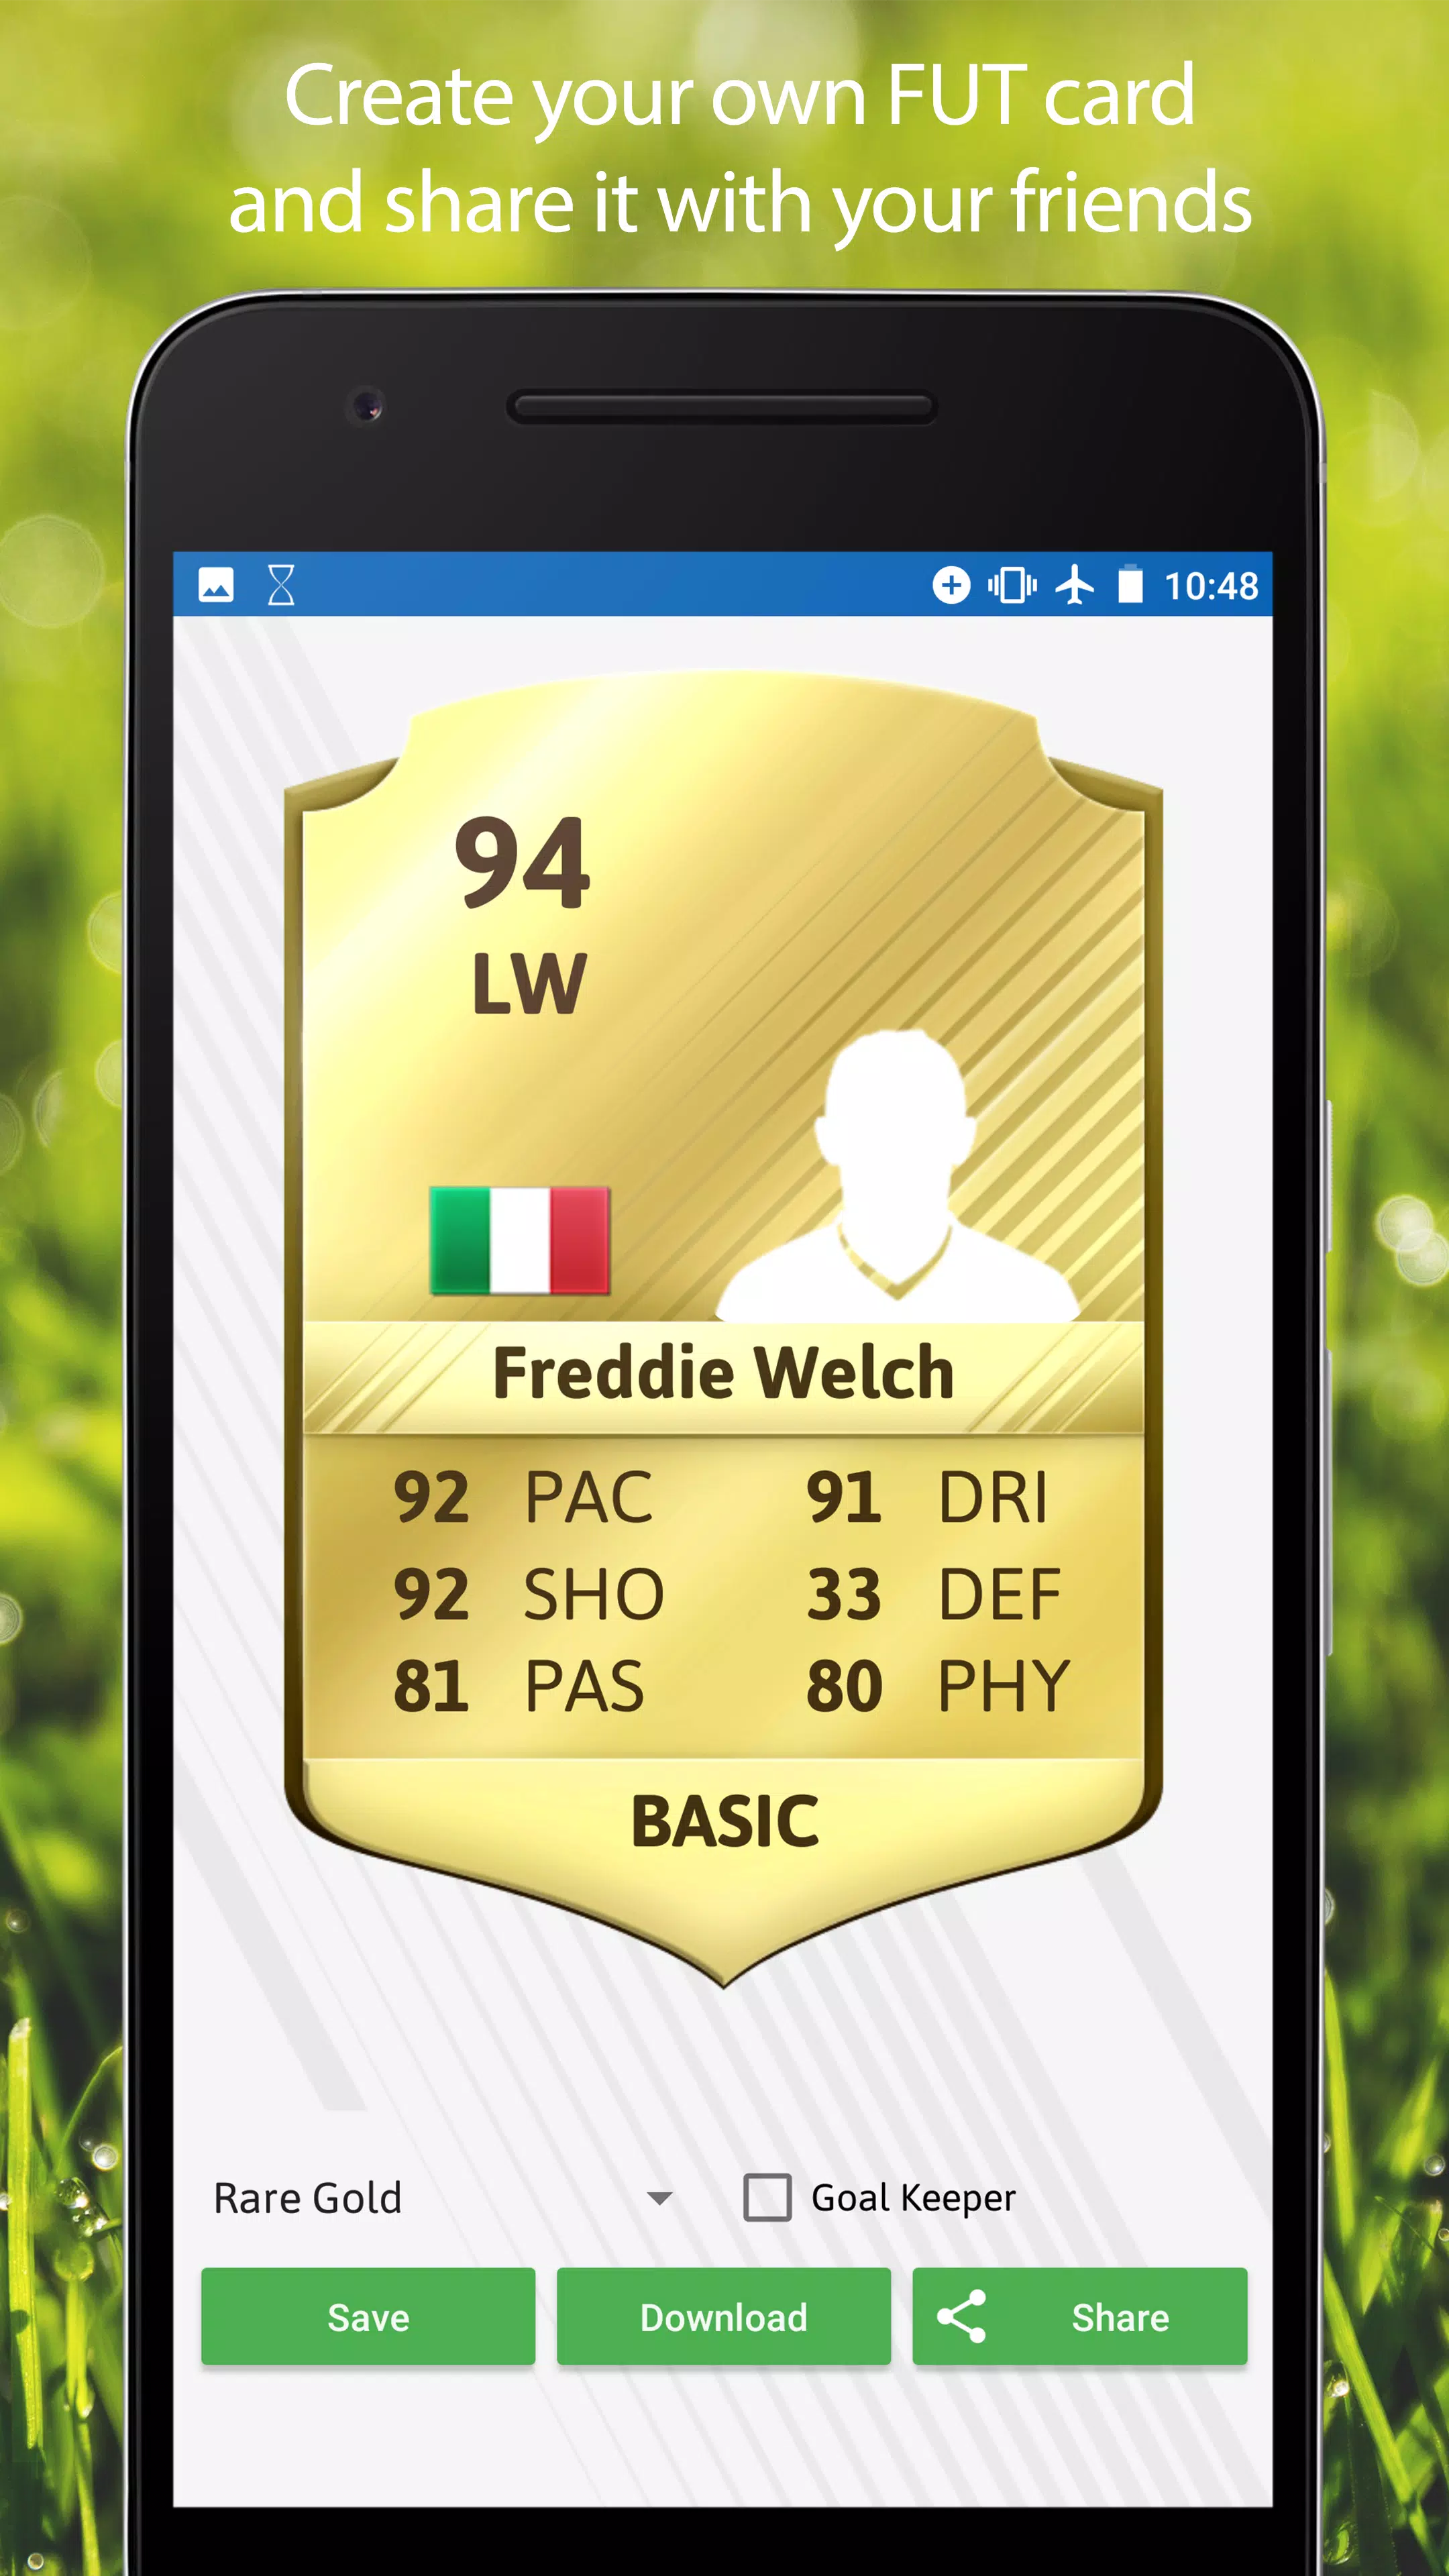 Download FUT Card Builder 22 10.0.0 for Android 